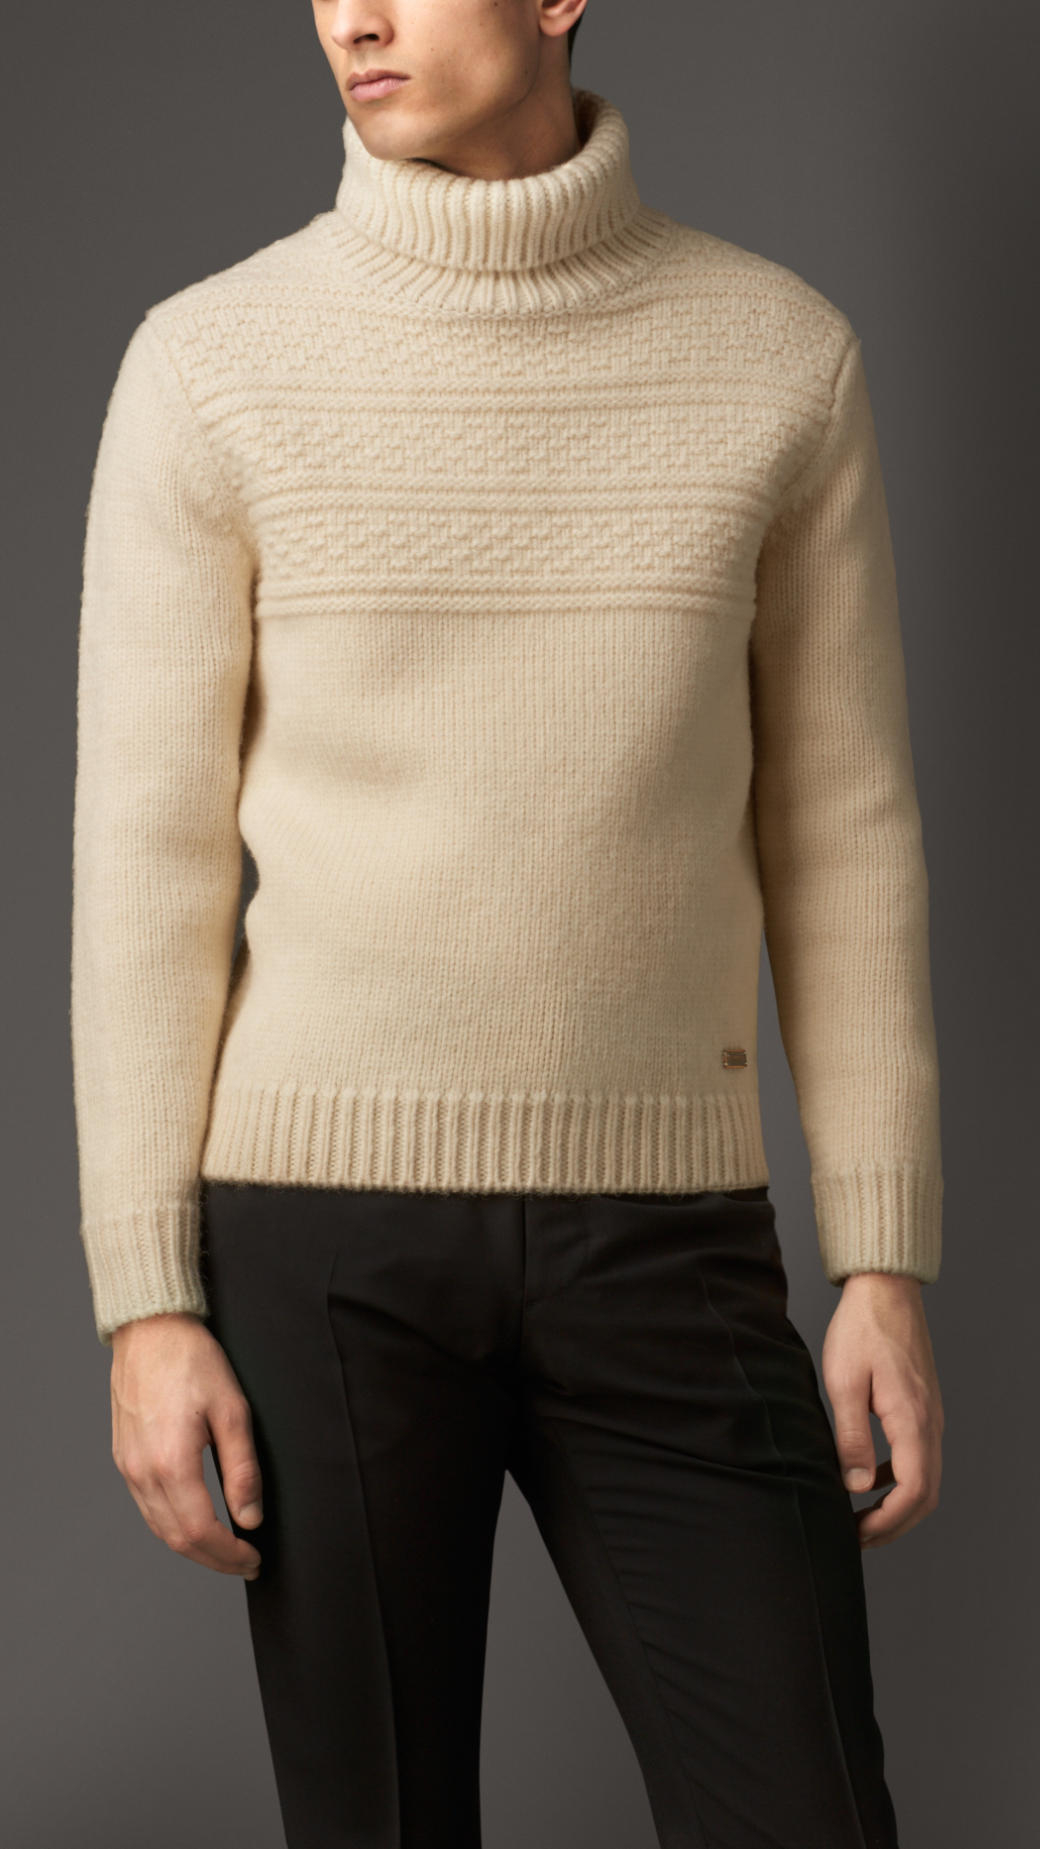 Lyst - Burberry Merino Wool Cashmere Roll Neck Sweater in Natural for Men